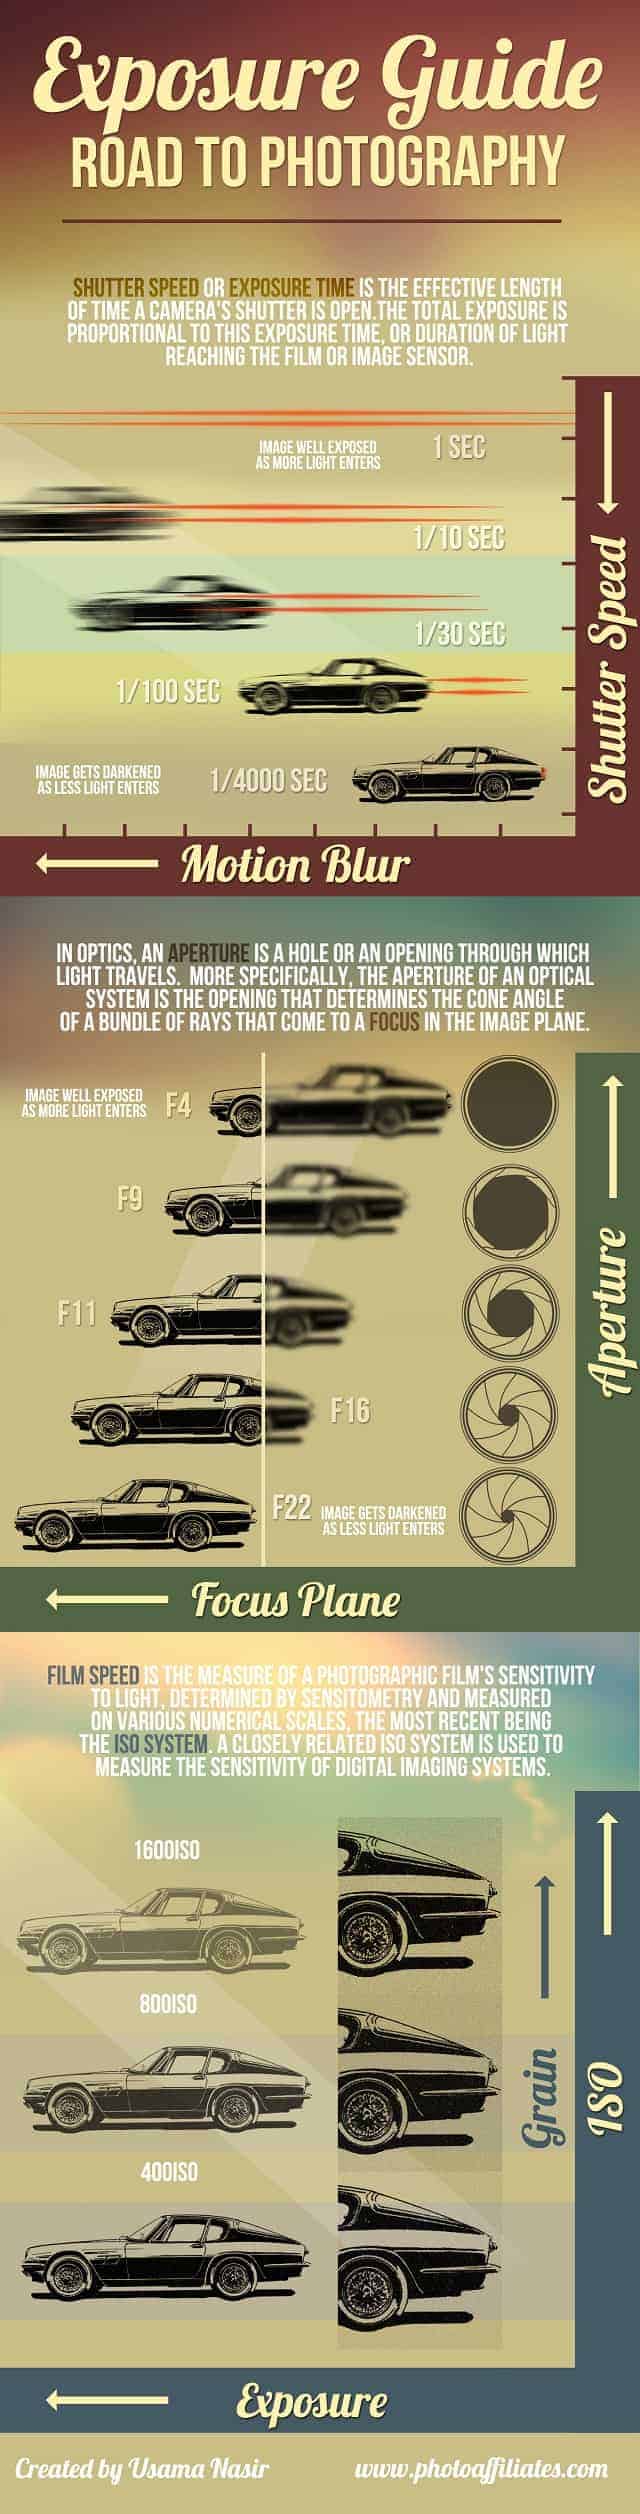 Photography-Exposure-guide-Infographic